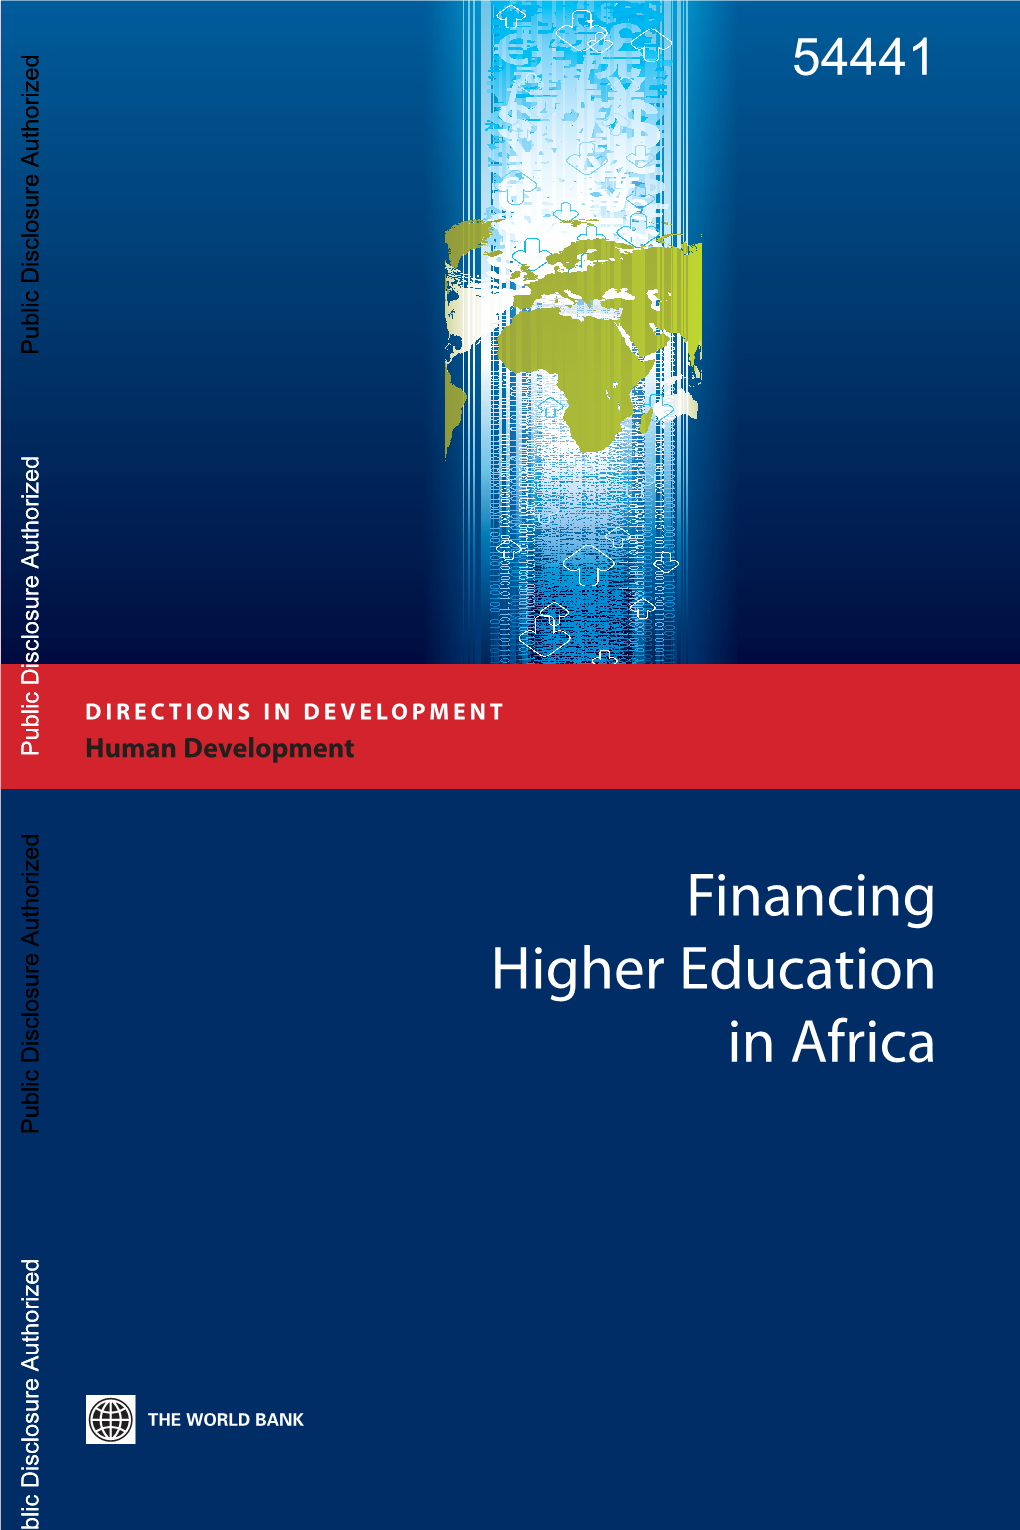 Financing Higher Education in Africa Public Disclosure Authorized Public Disclosure Authorized FHEA I-Xx.Qxd 4/7/10 2:46 PM Page I